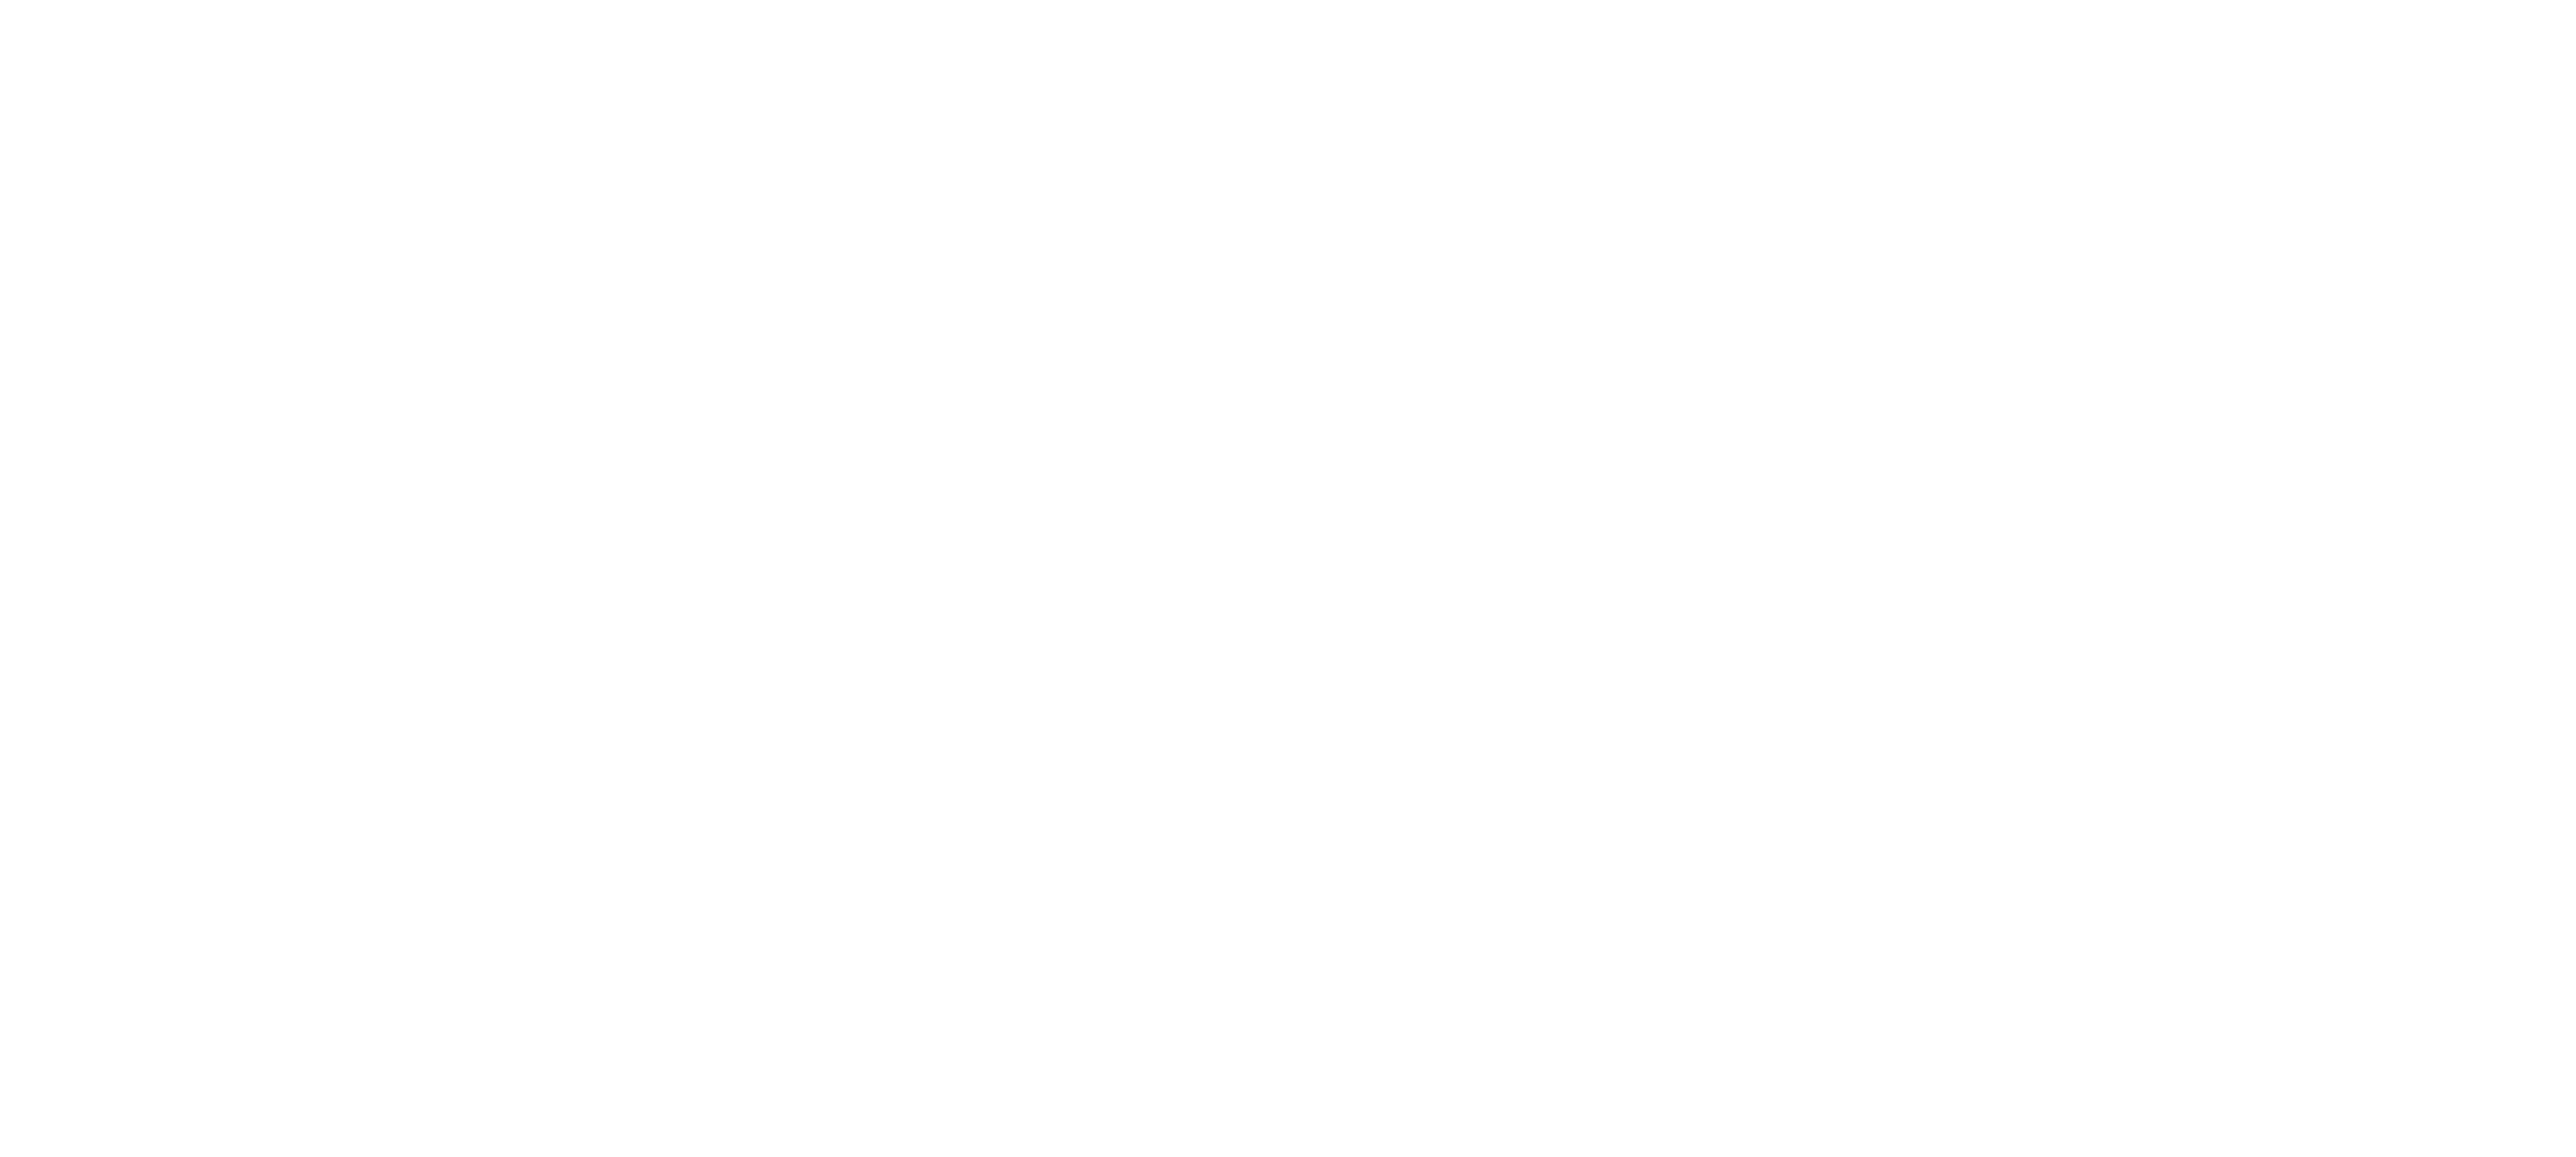 Mark Moore Consulting